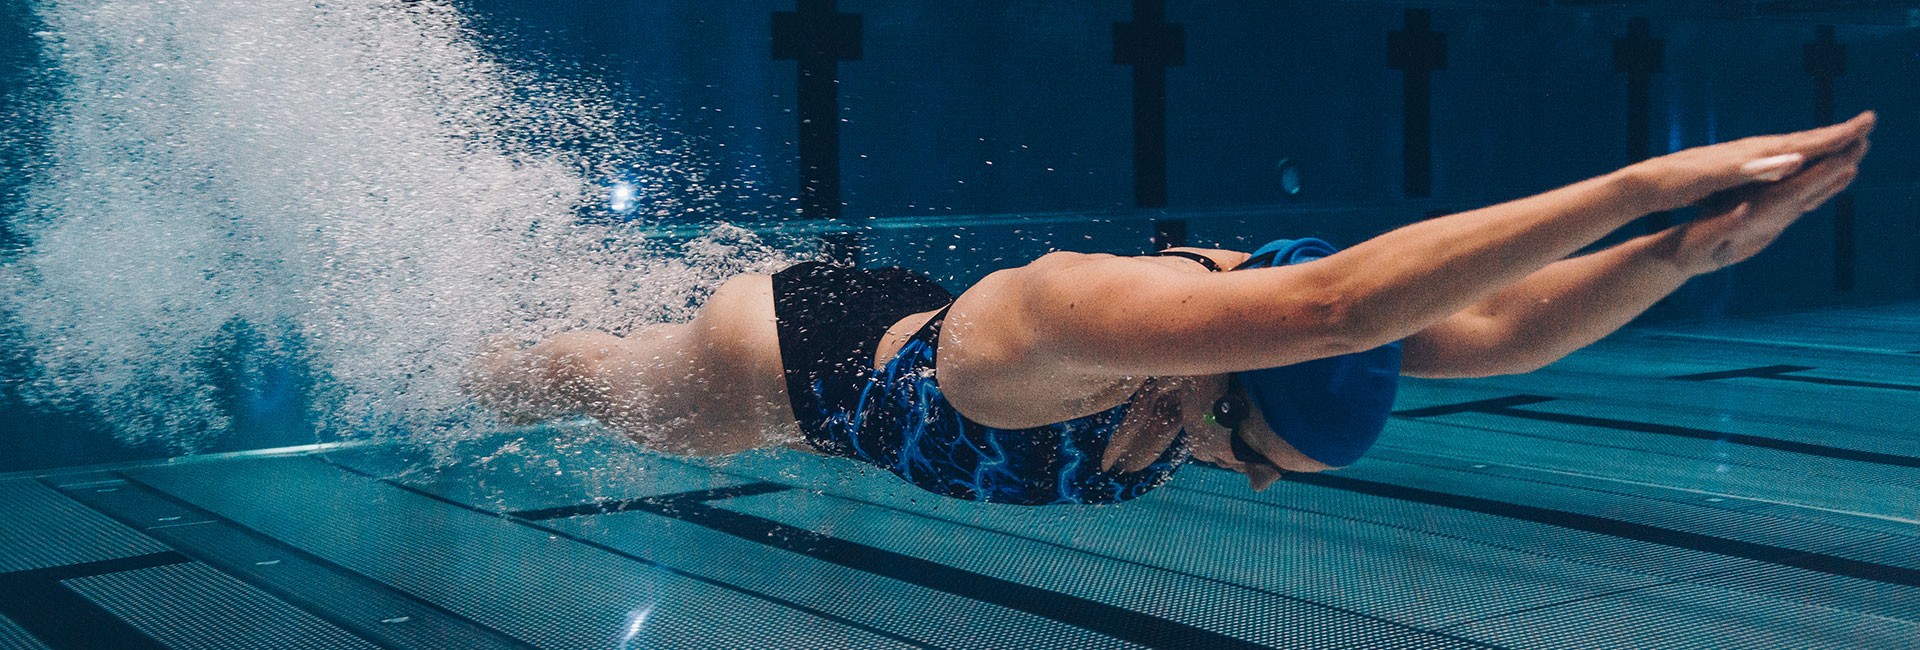 Structuring a Weight Workout Routine for Swimmers